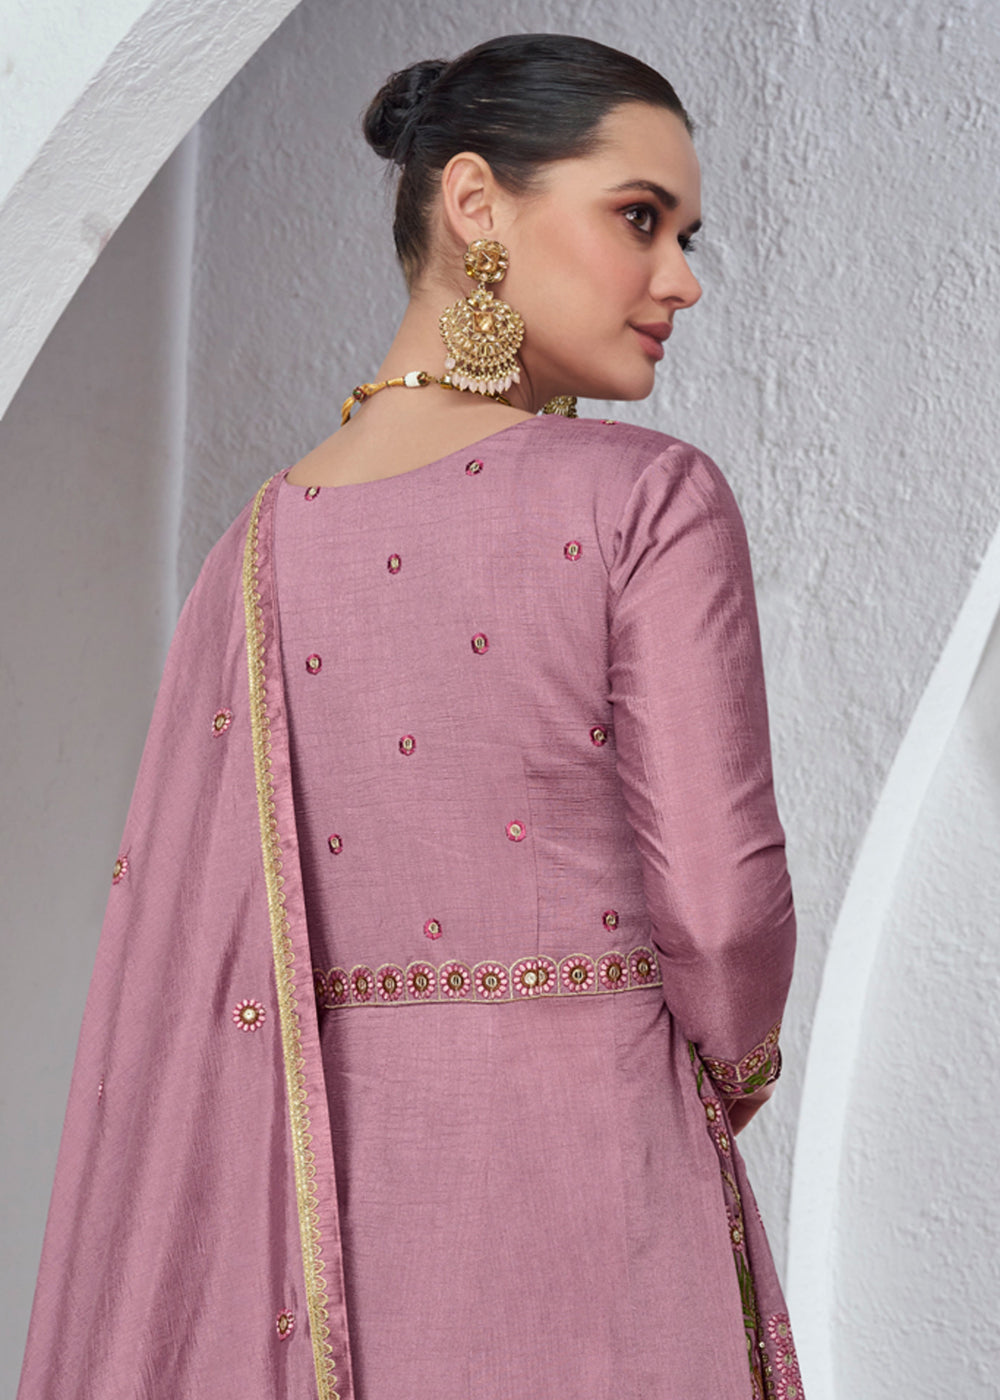 Buy Now Rose Pink Front Slit Embroidered Lehenga Skirt Suit Online in USA, UK, Canada, Germany, Australia & Worldwide at Empress Clothing.